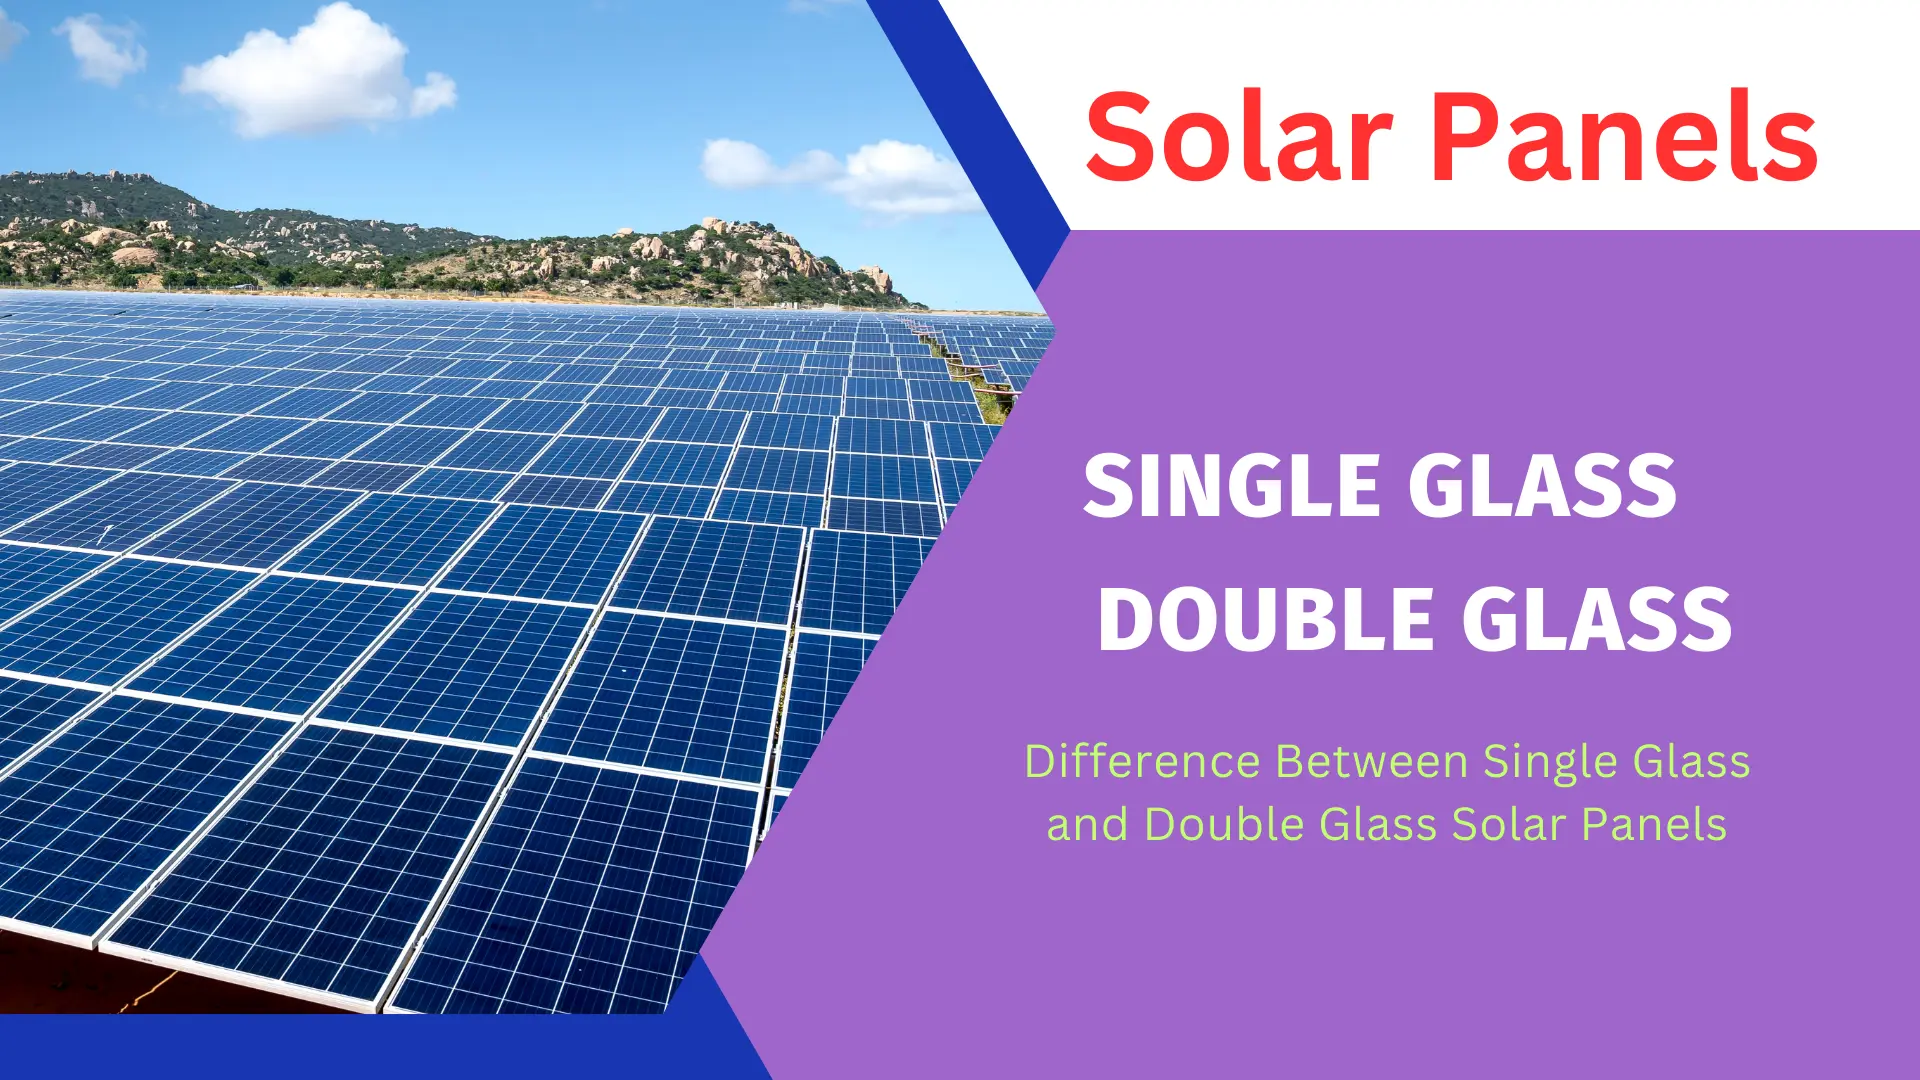 Difference between single glass and double glass solar panels